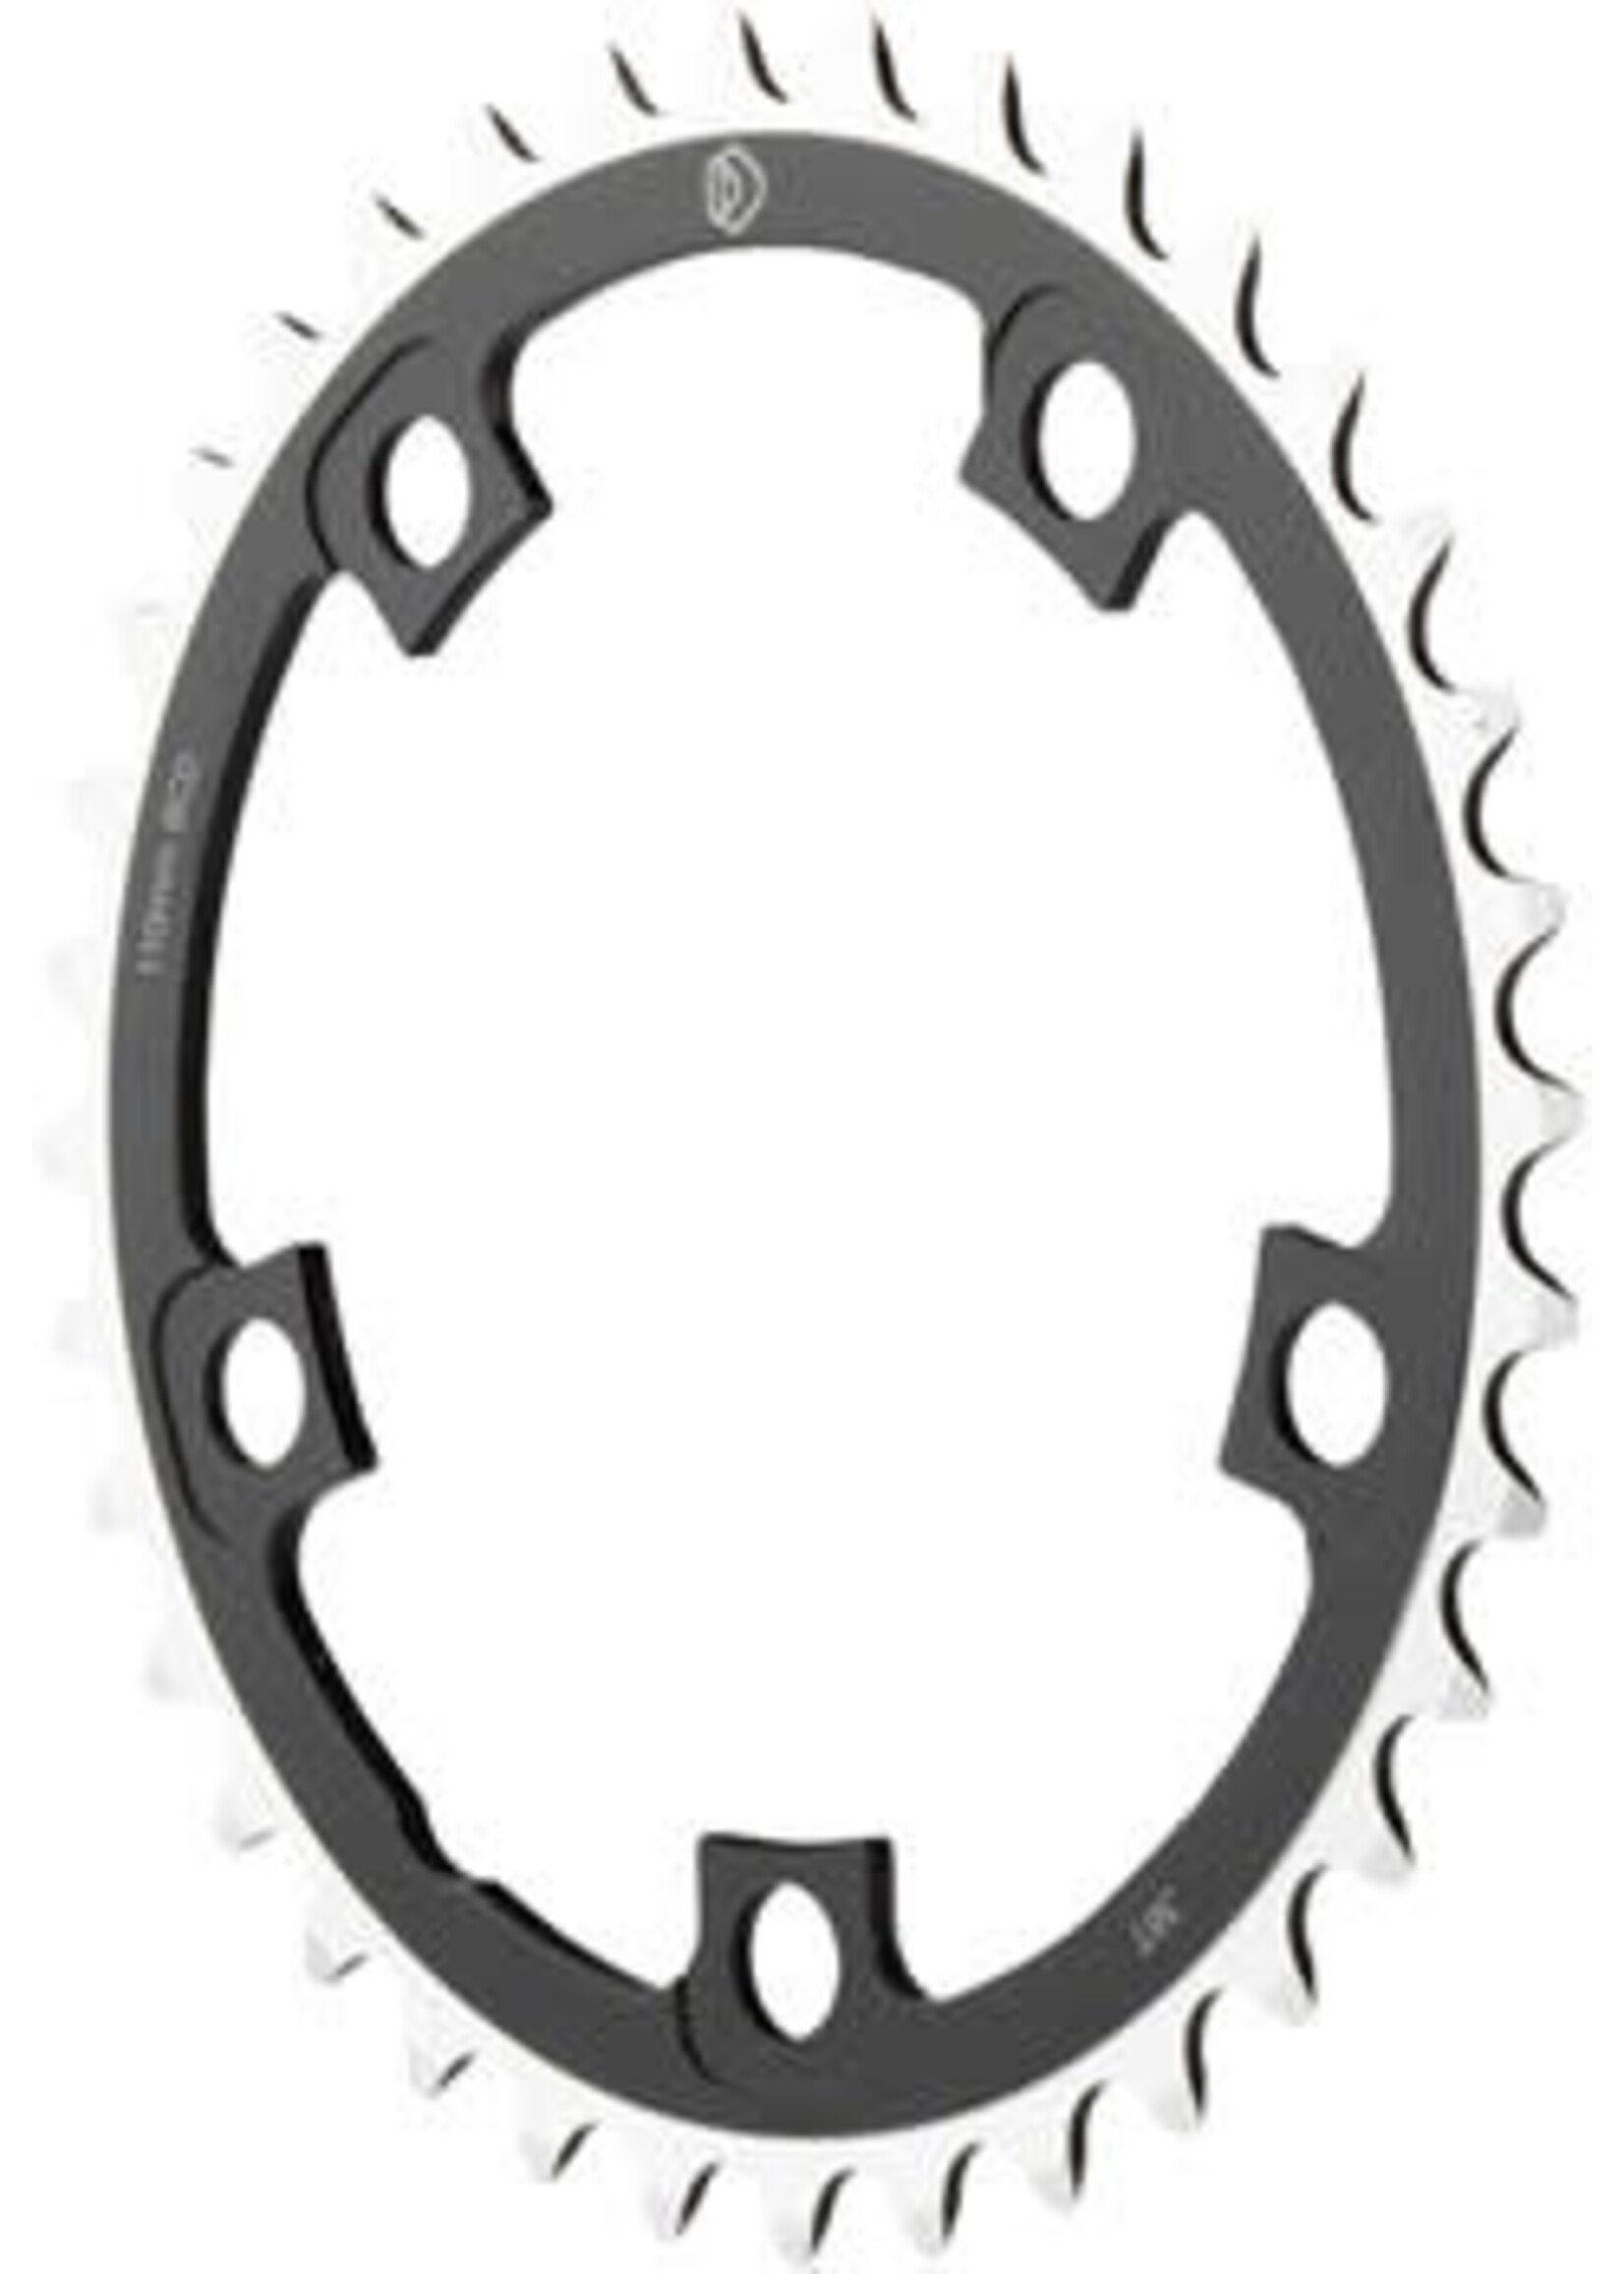 Dimension Dimension Multi Speed Chainring - 38T, 110mm BCD, Middle, Black